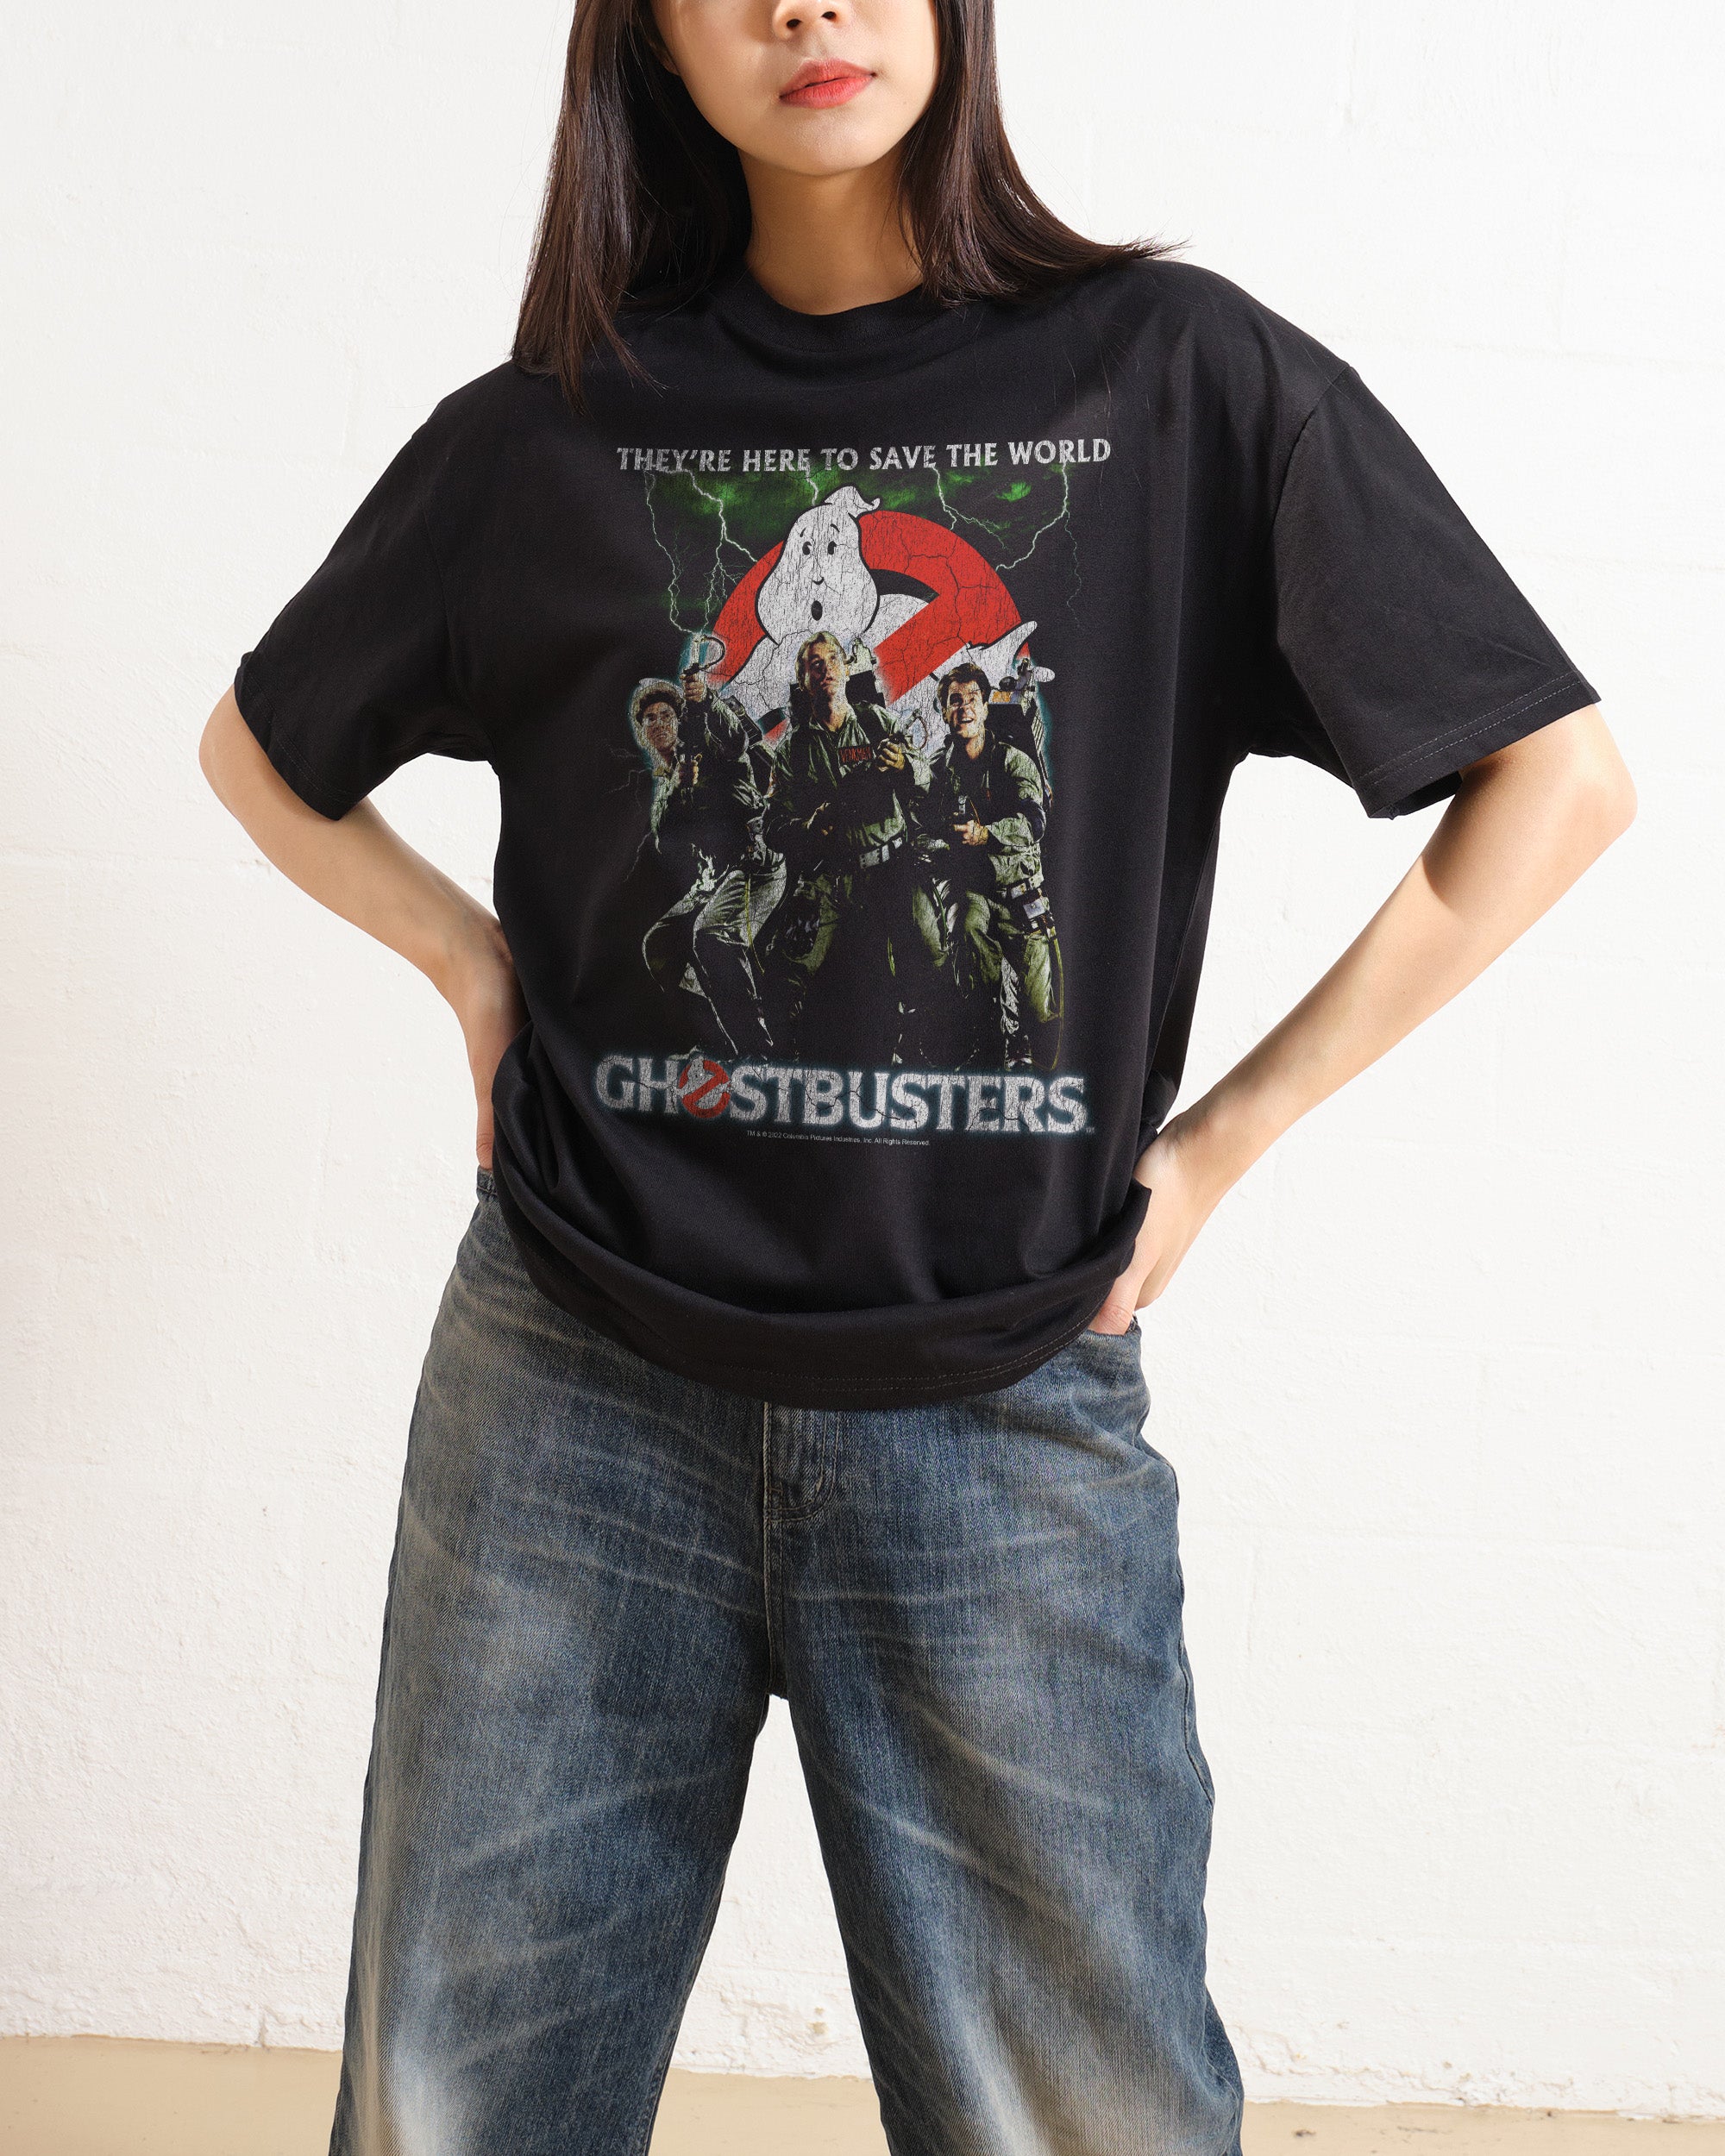 Ghostbusters Here To Save The World T-Shirt